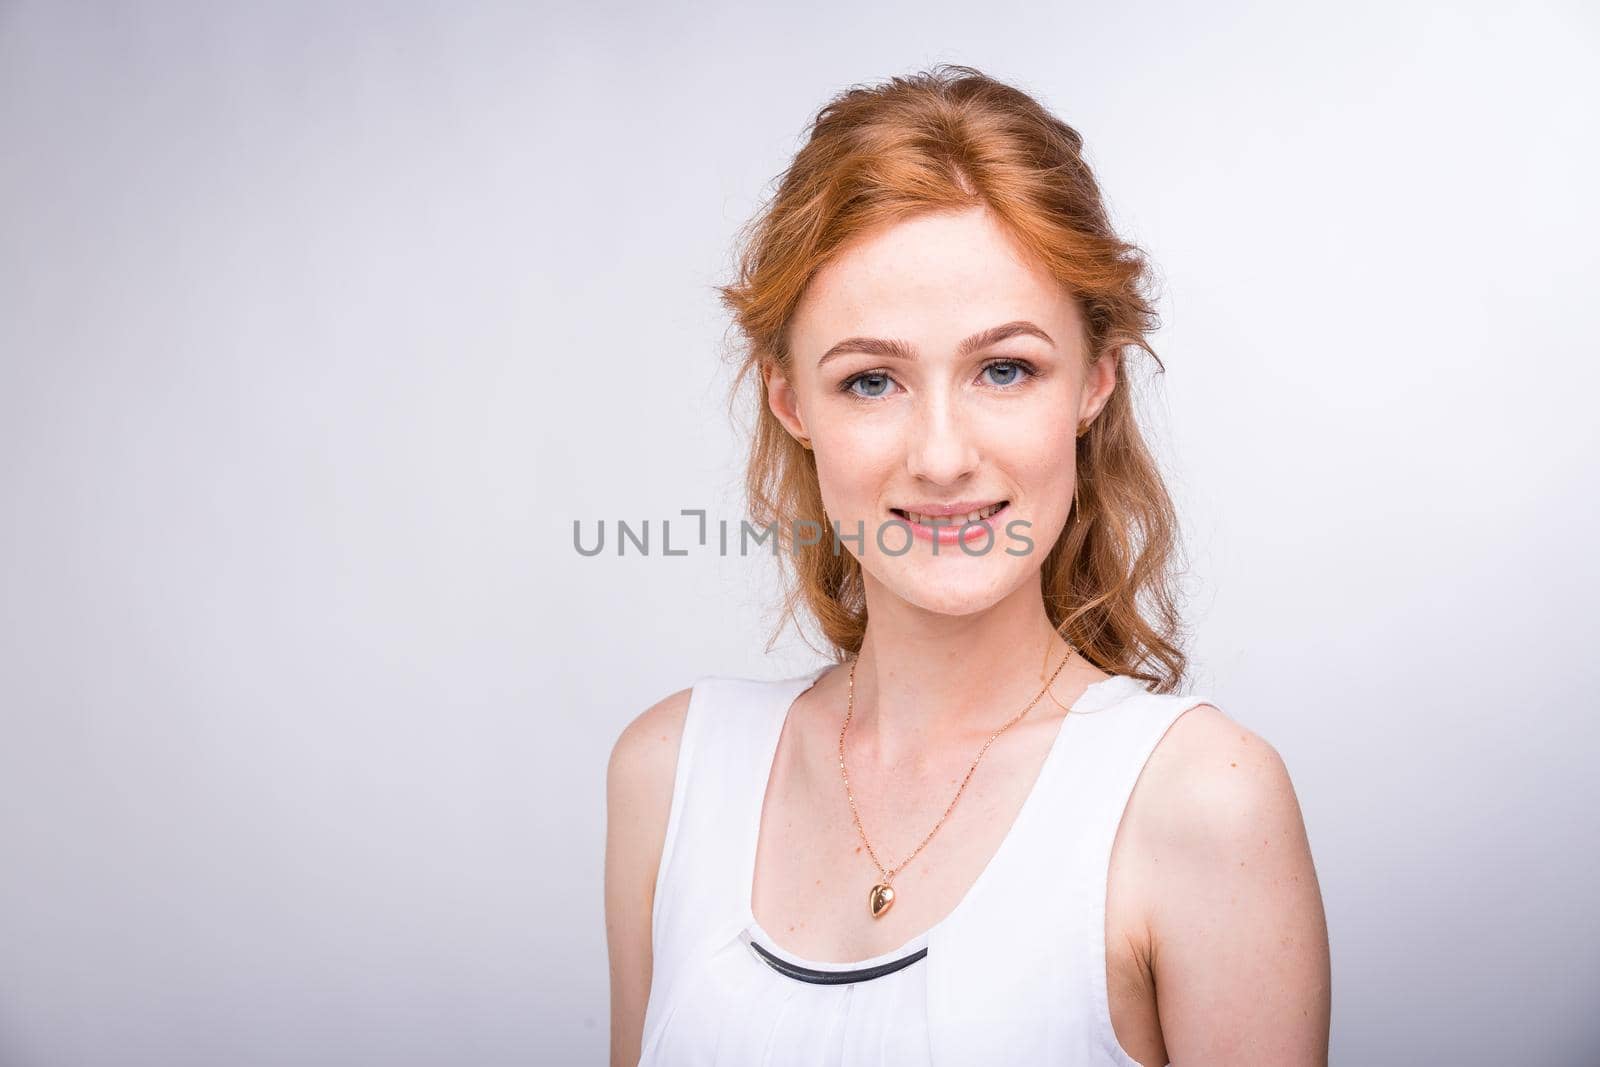 Portrait of a beautiful young female student with a smile in a white shirt of European, Caucasian nationality with long red hair and freckles on her face posing on a white background in the studio by Tomashevska